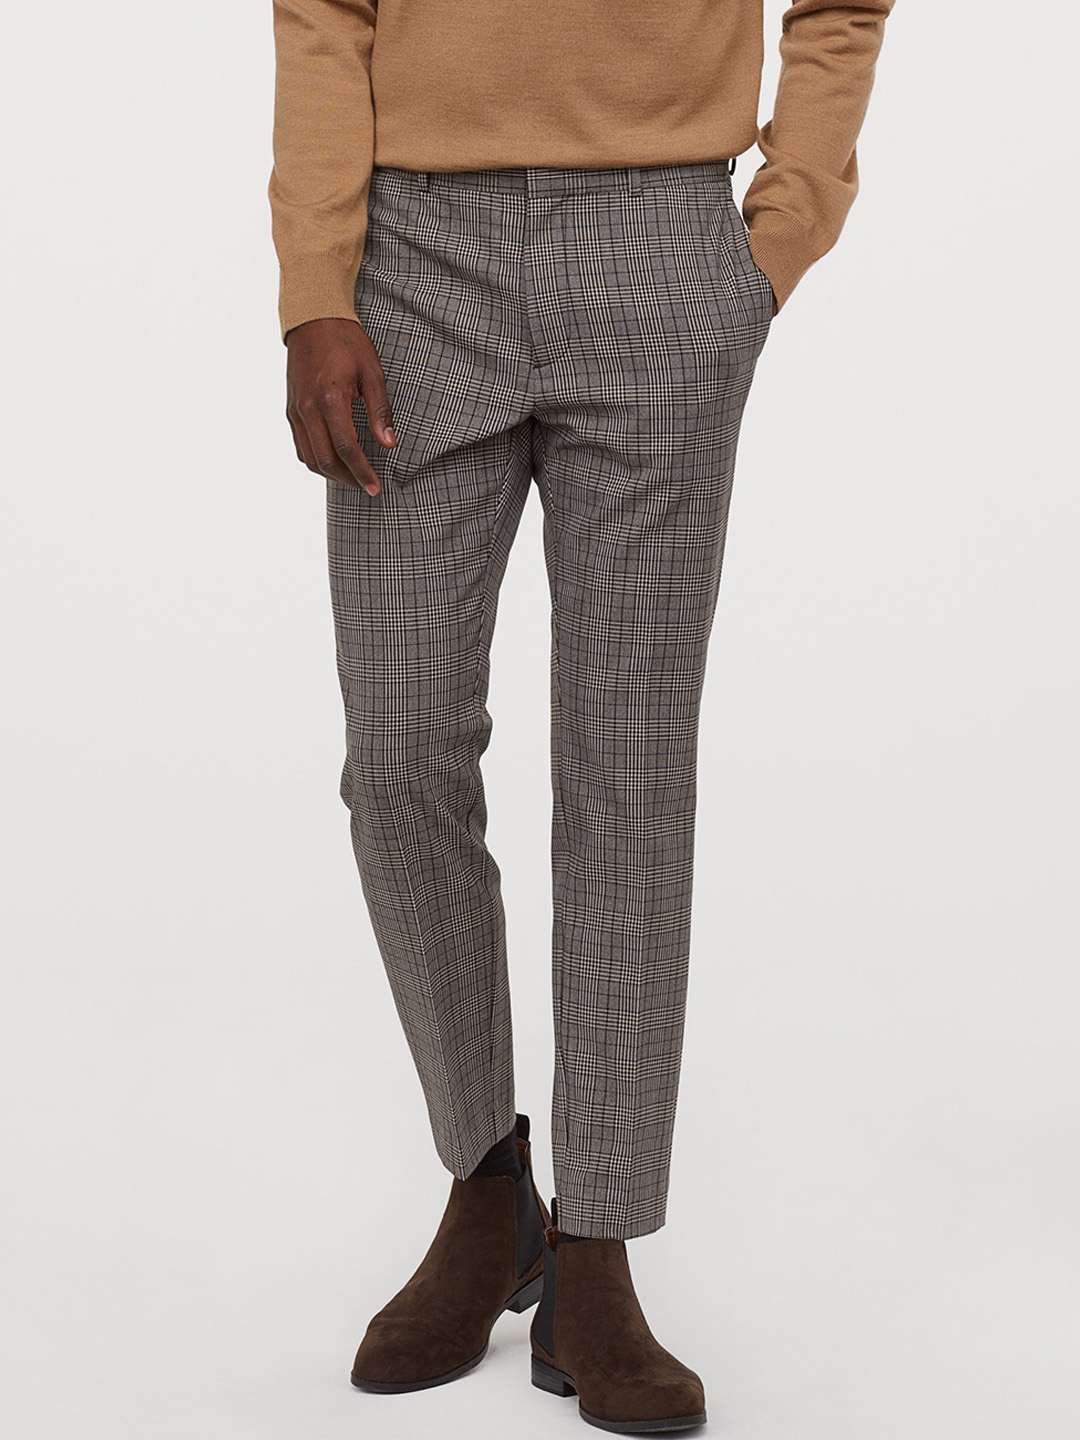 Buy H&M Men Beige & Black Checked Suit Trousers Skinny Fit - Trousers ...